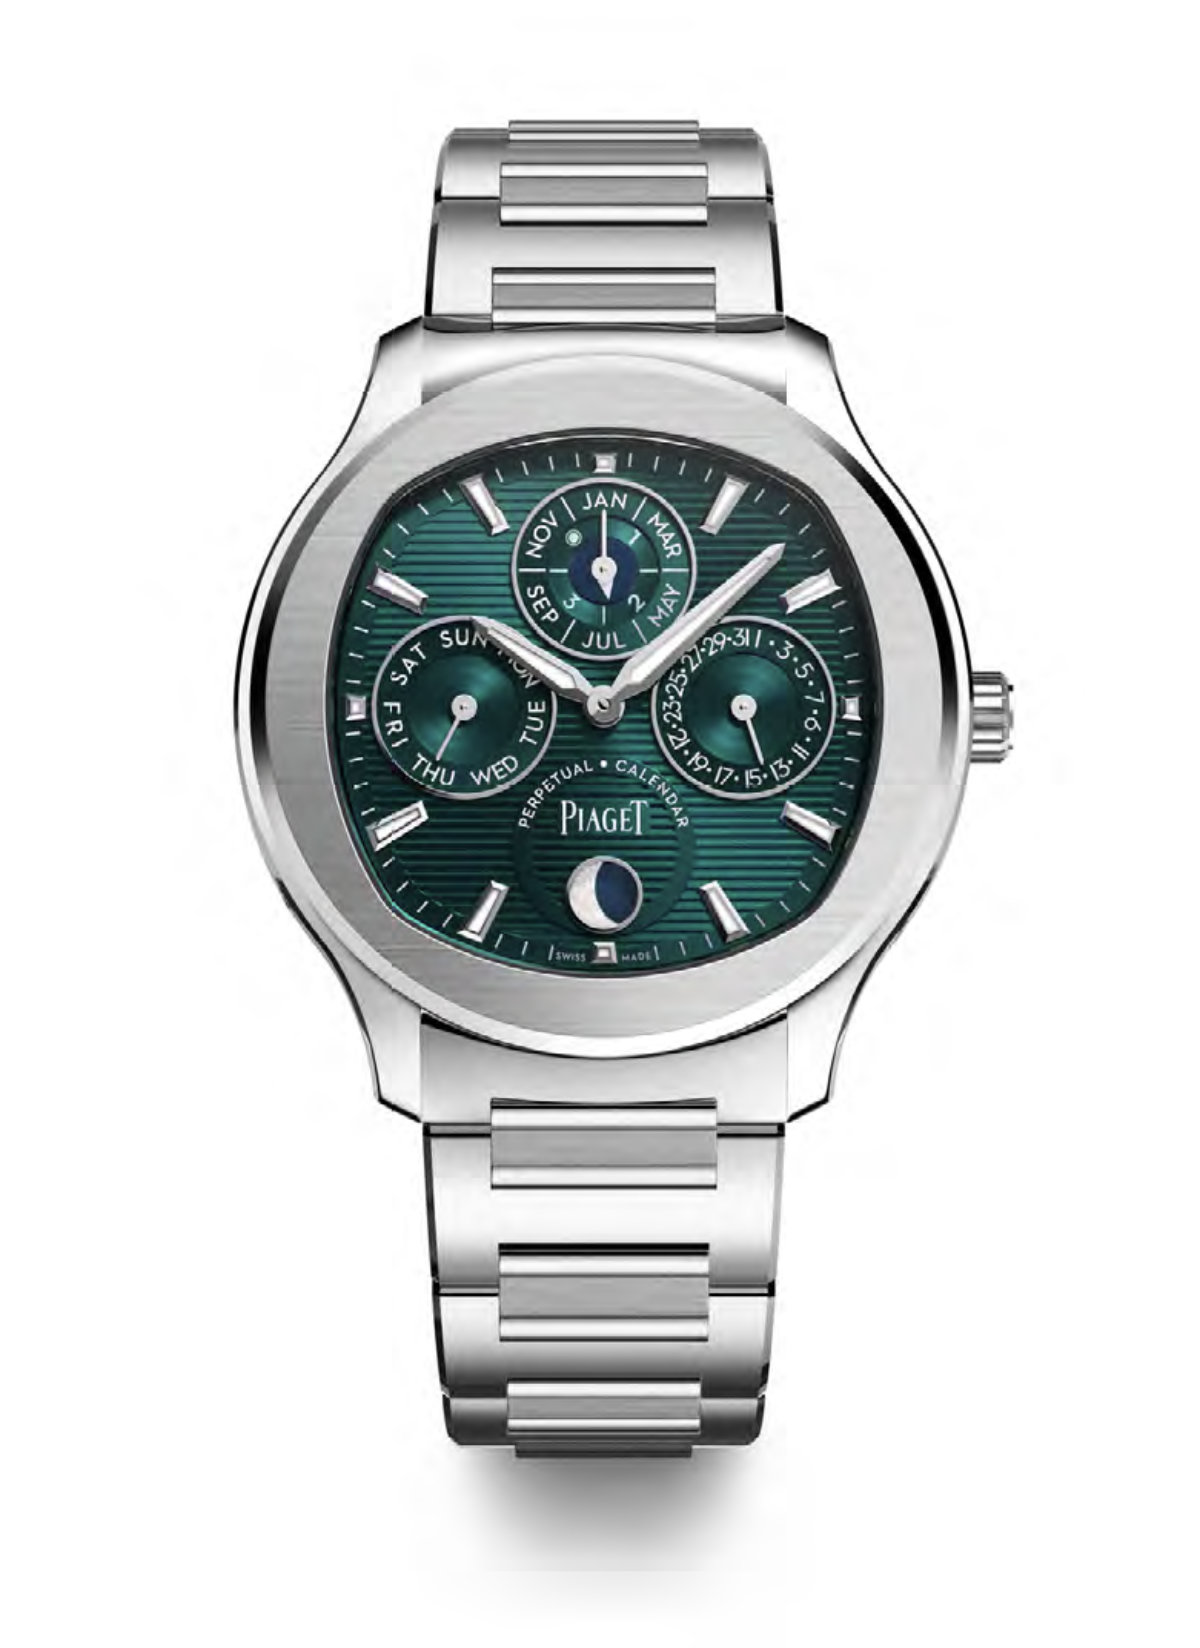 Piaget Presents Its New Polo Perpetual Calendar Ultra-Thin Watch - Perpetual Extraleganza